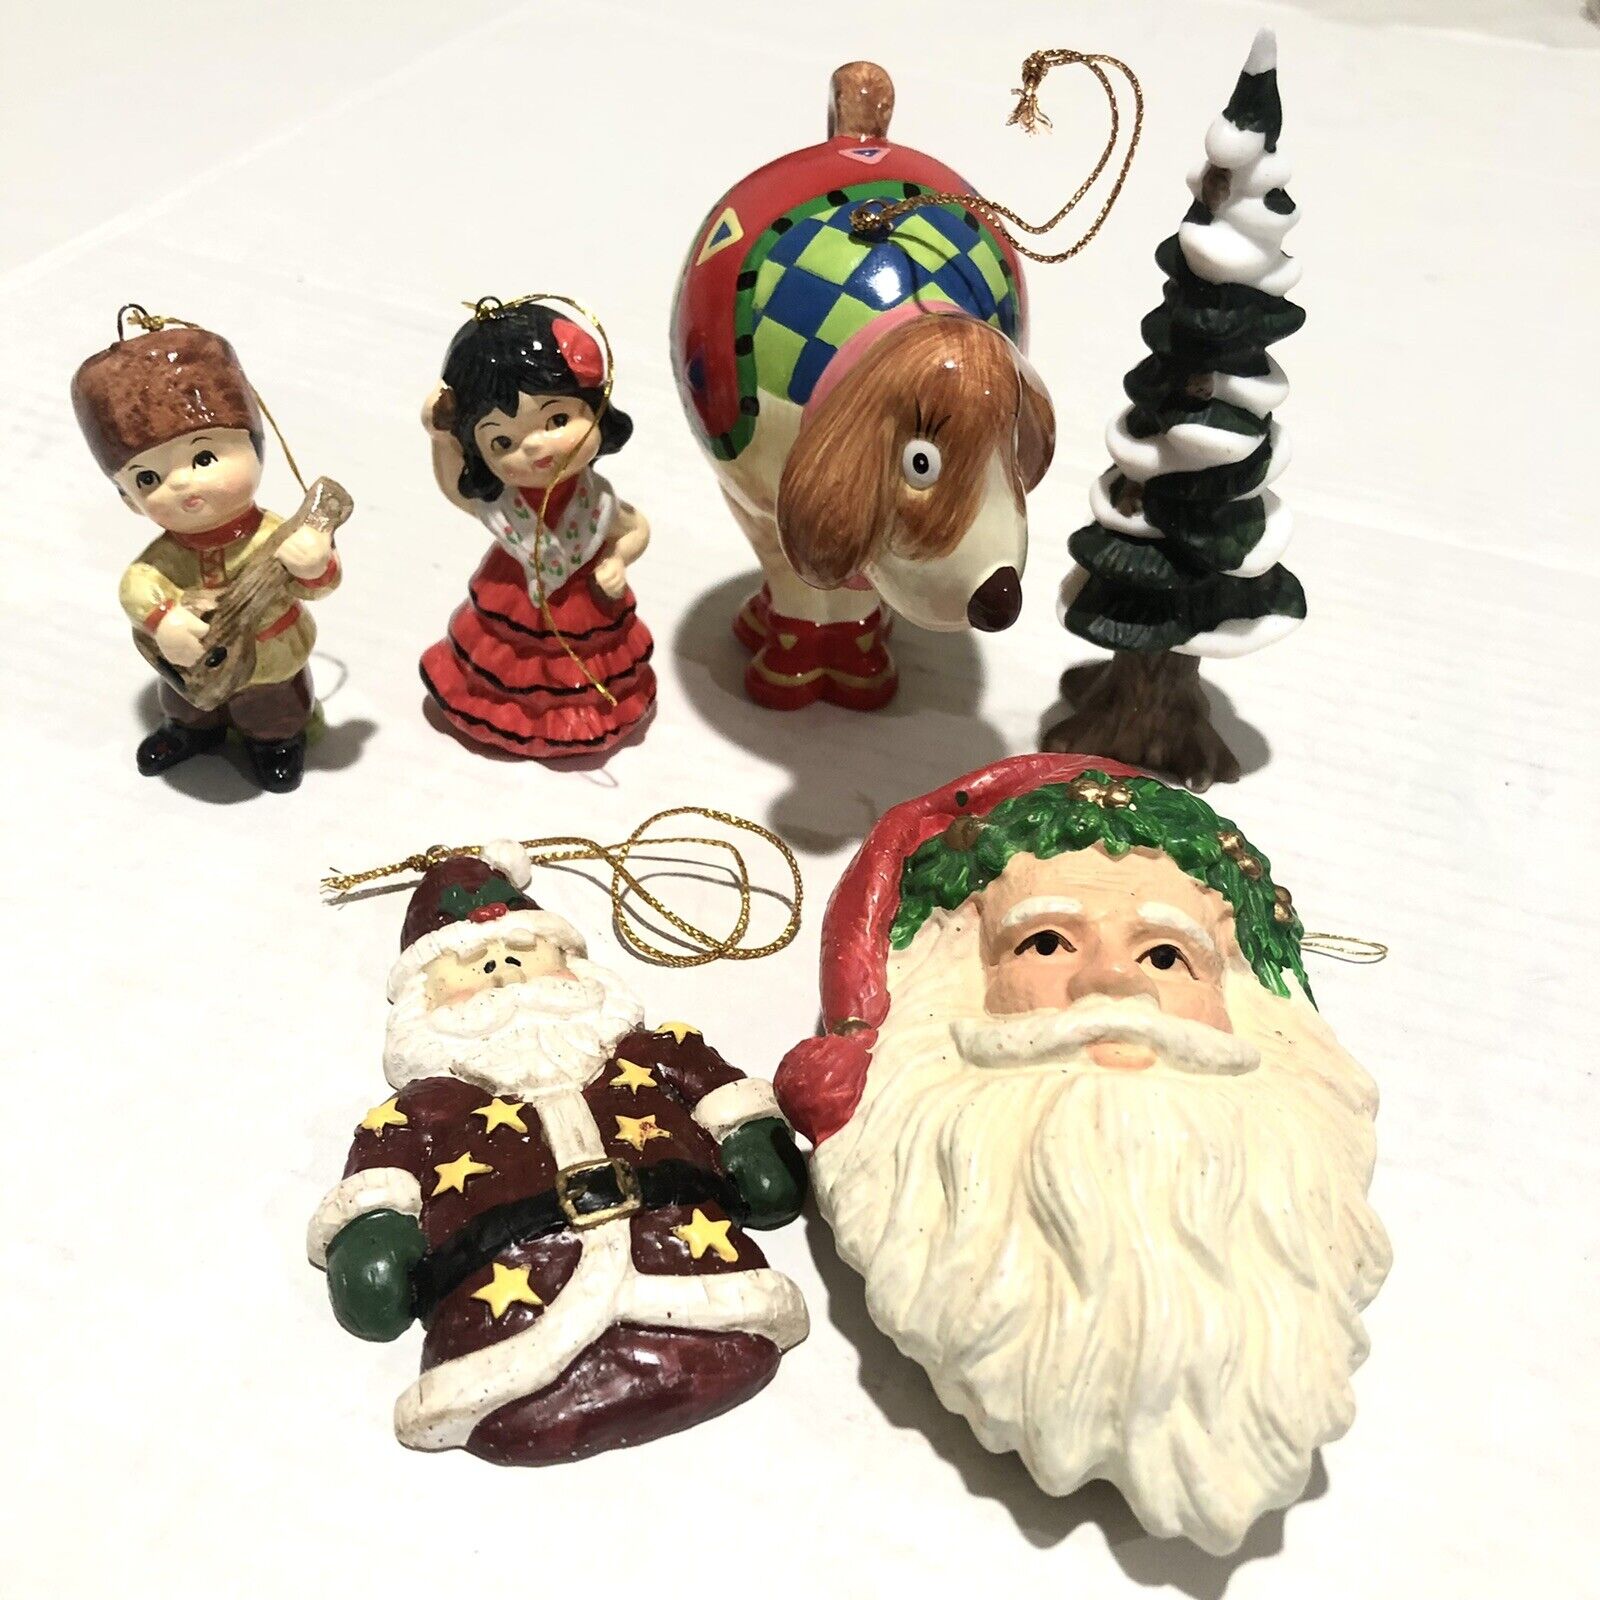 Vintage Christmas Ornament Figurine Lot of 6  Christmas in July Sale